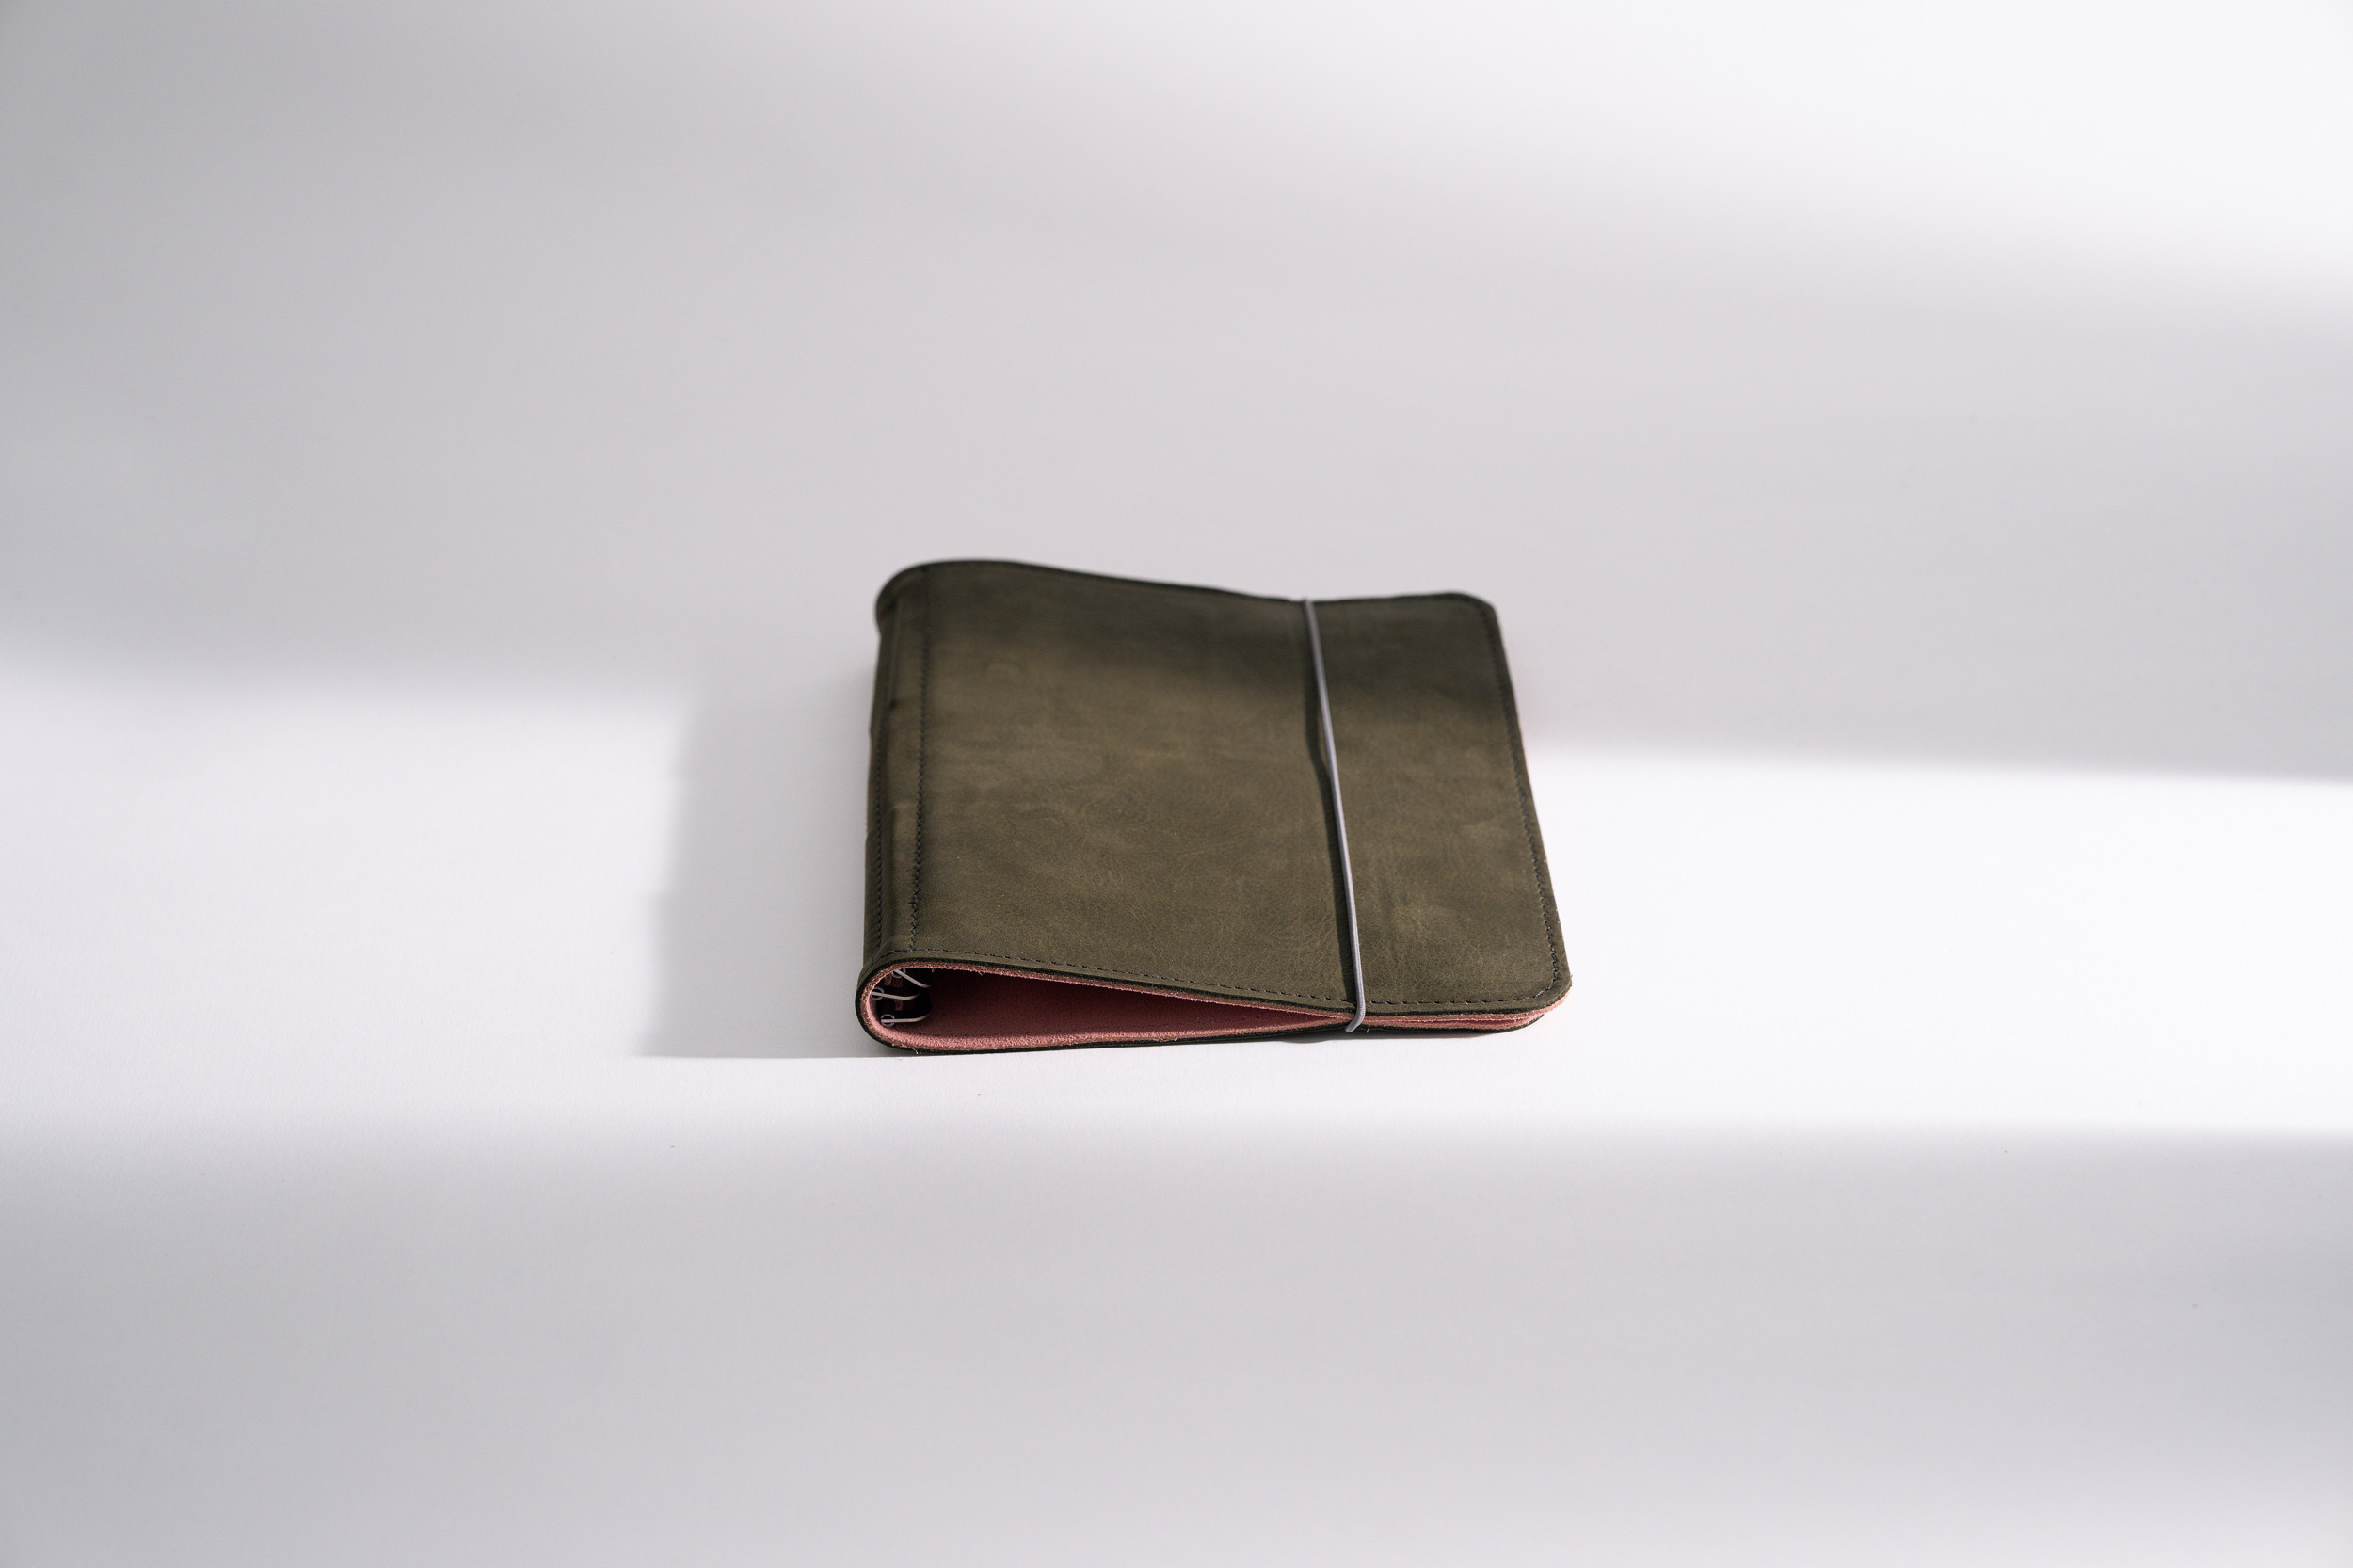 Roterfaden Taschenbegleiter SO_23 Organizer - Lightly sanded leather, chrome-free, and certified with BLAUER ENGEL in A5 and B6 - with elastic closure.